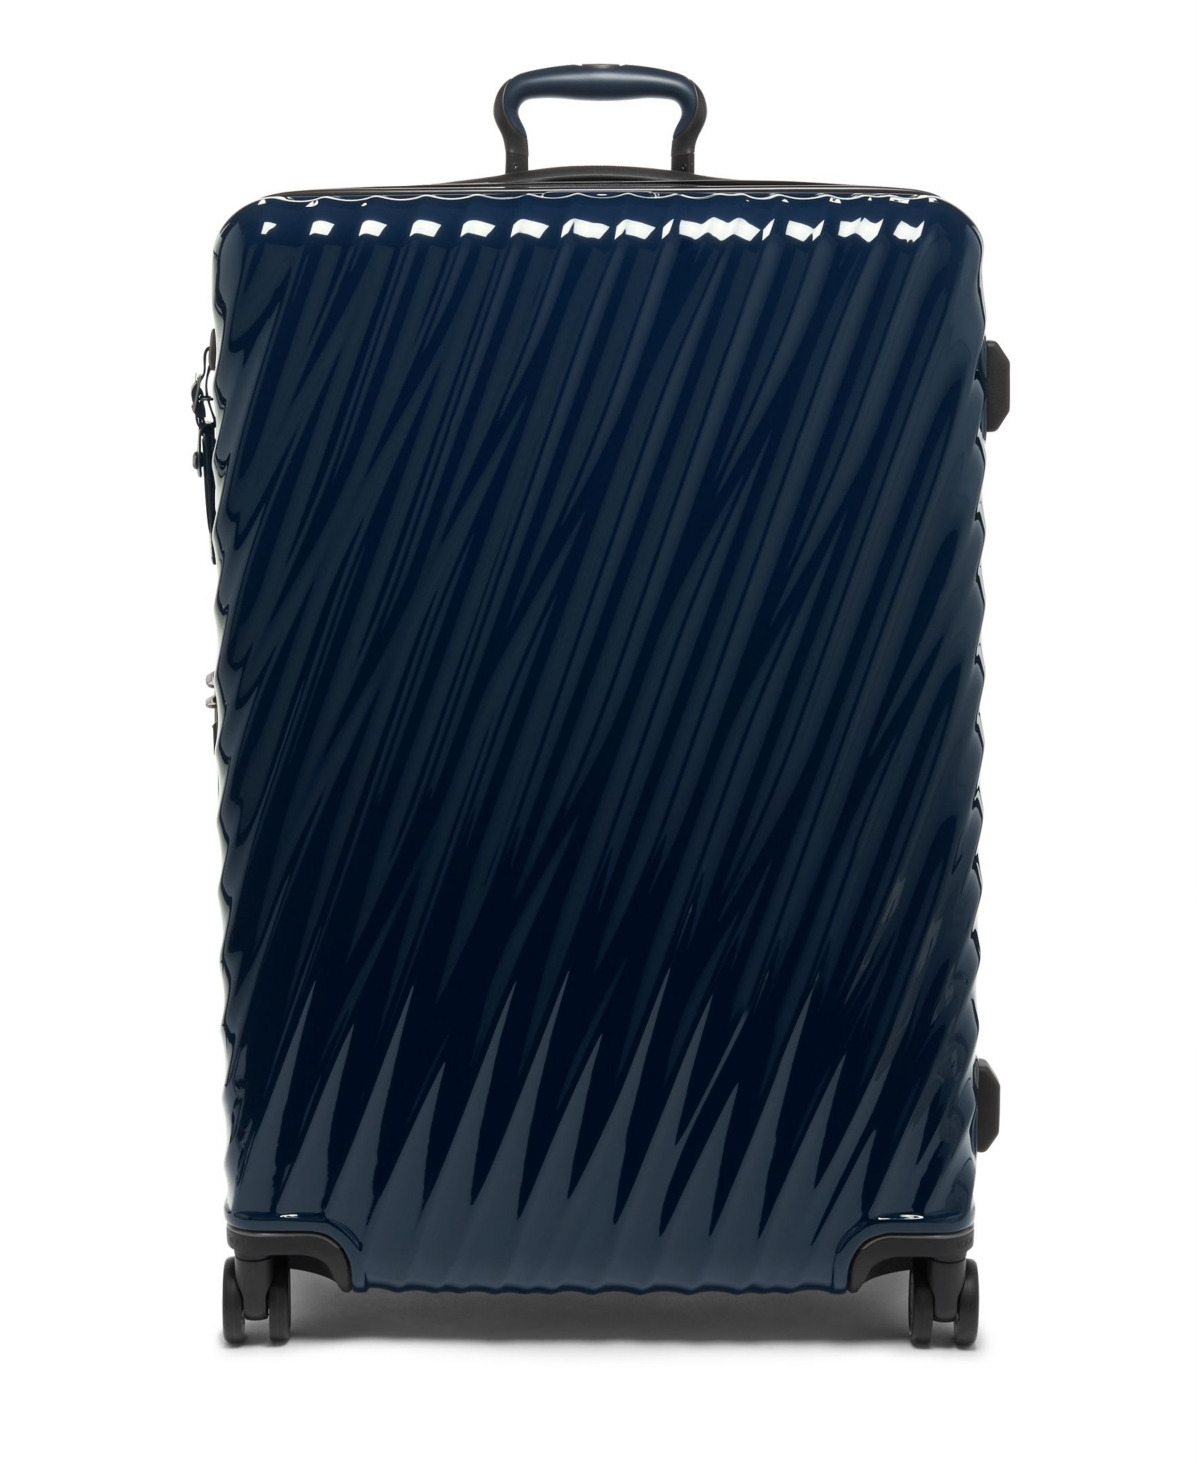 19 Degree Extended Trip Expandable 4 Wheel Packing Case - Navy